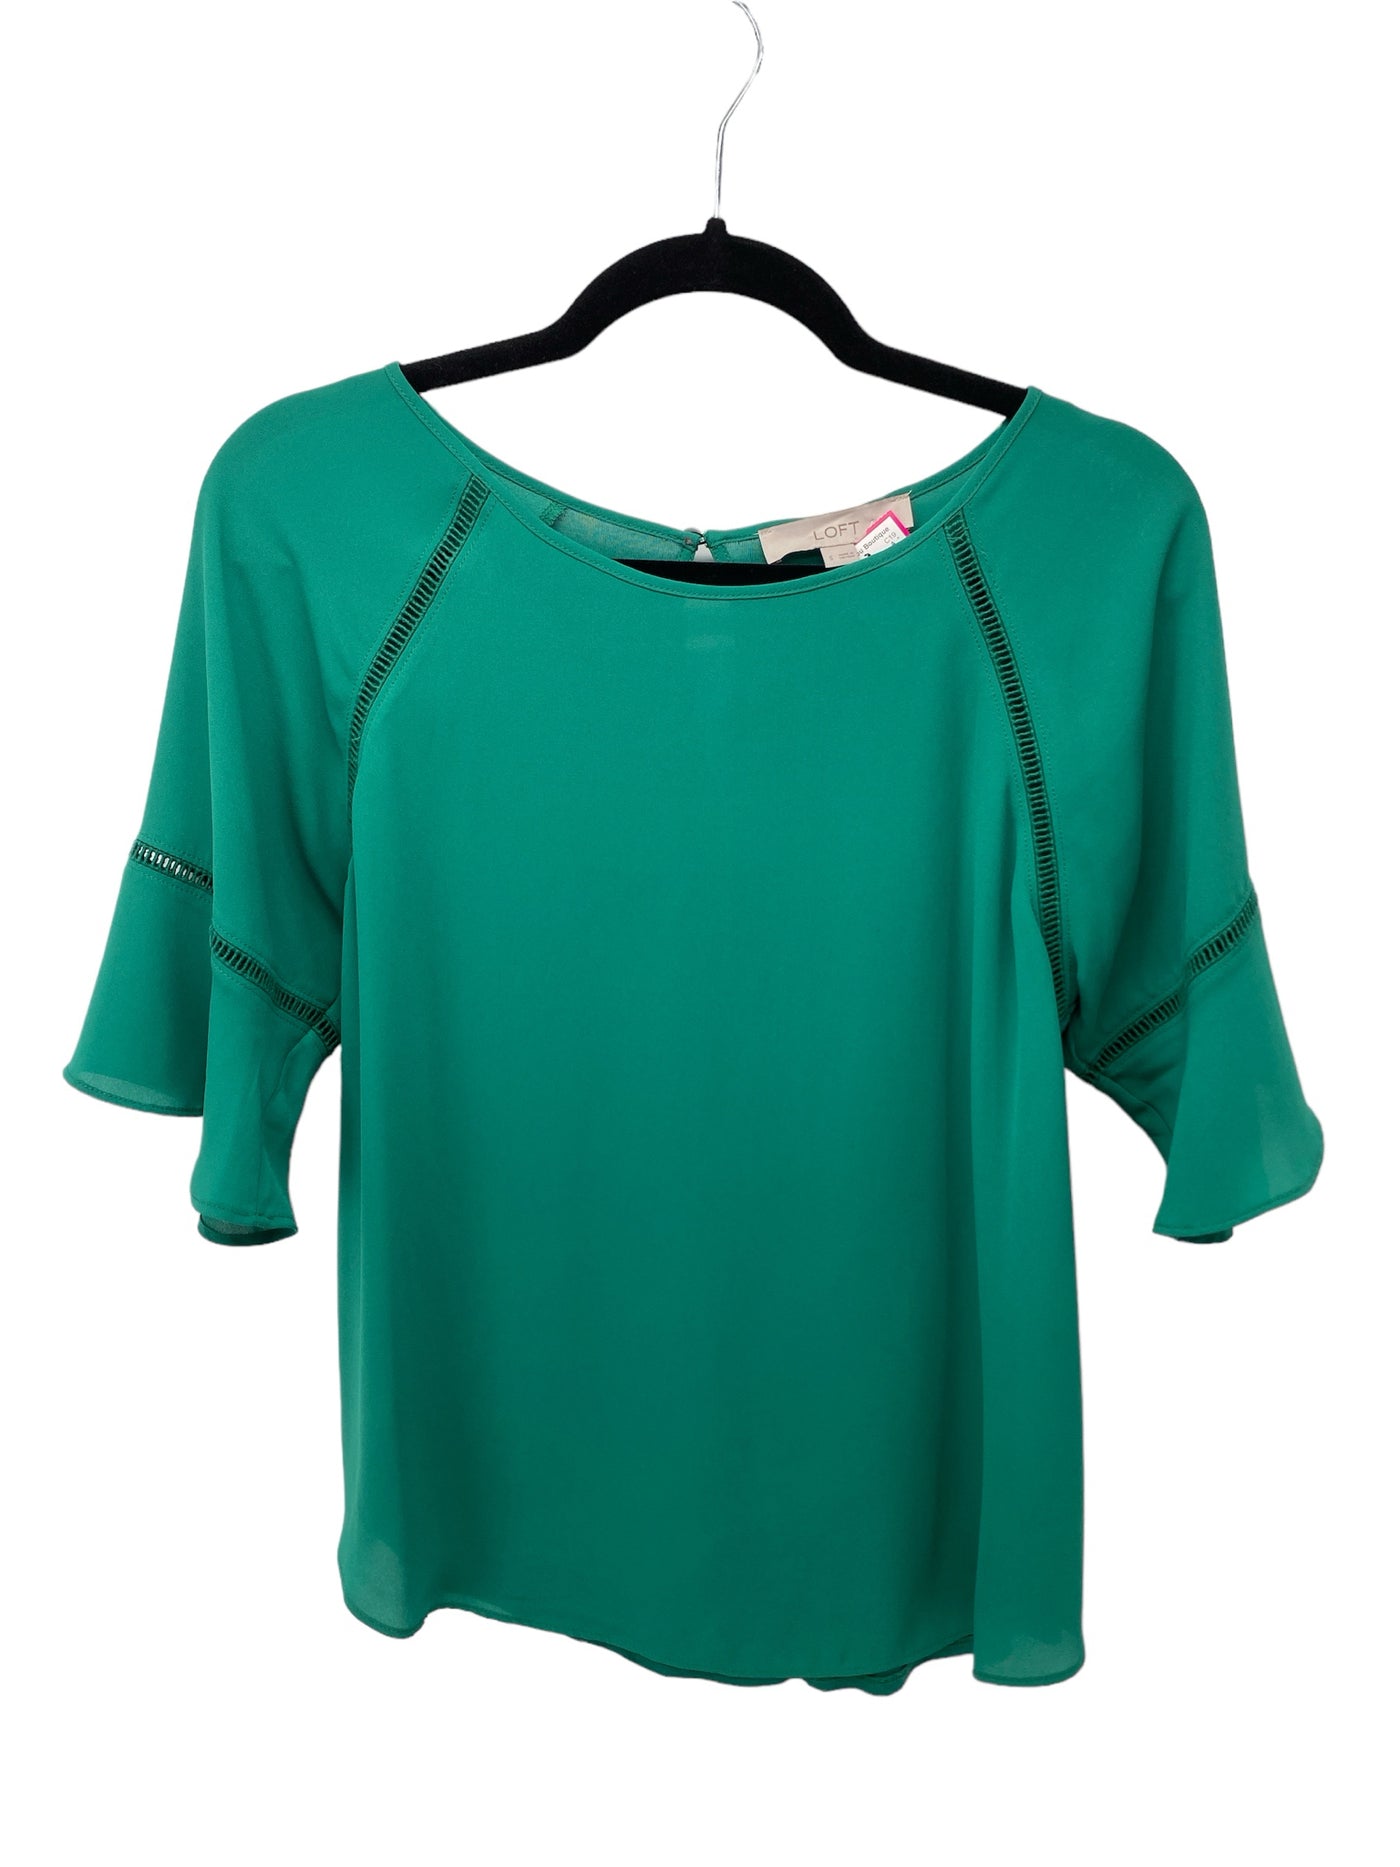 Loft Misses Size Small Green SS Blouse